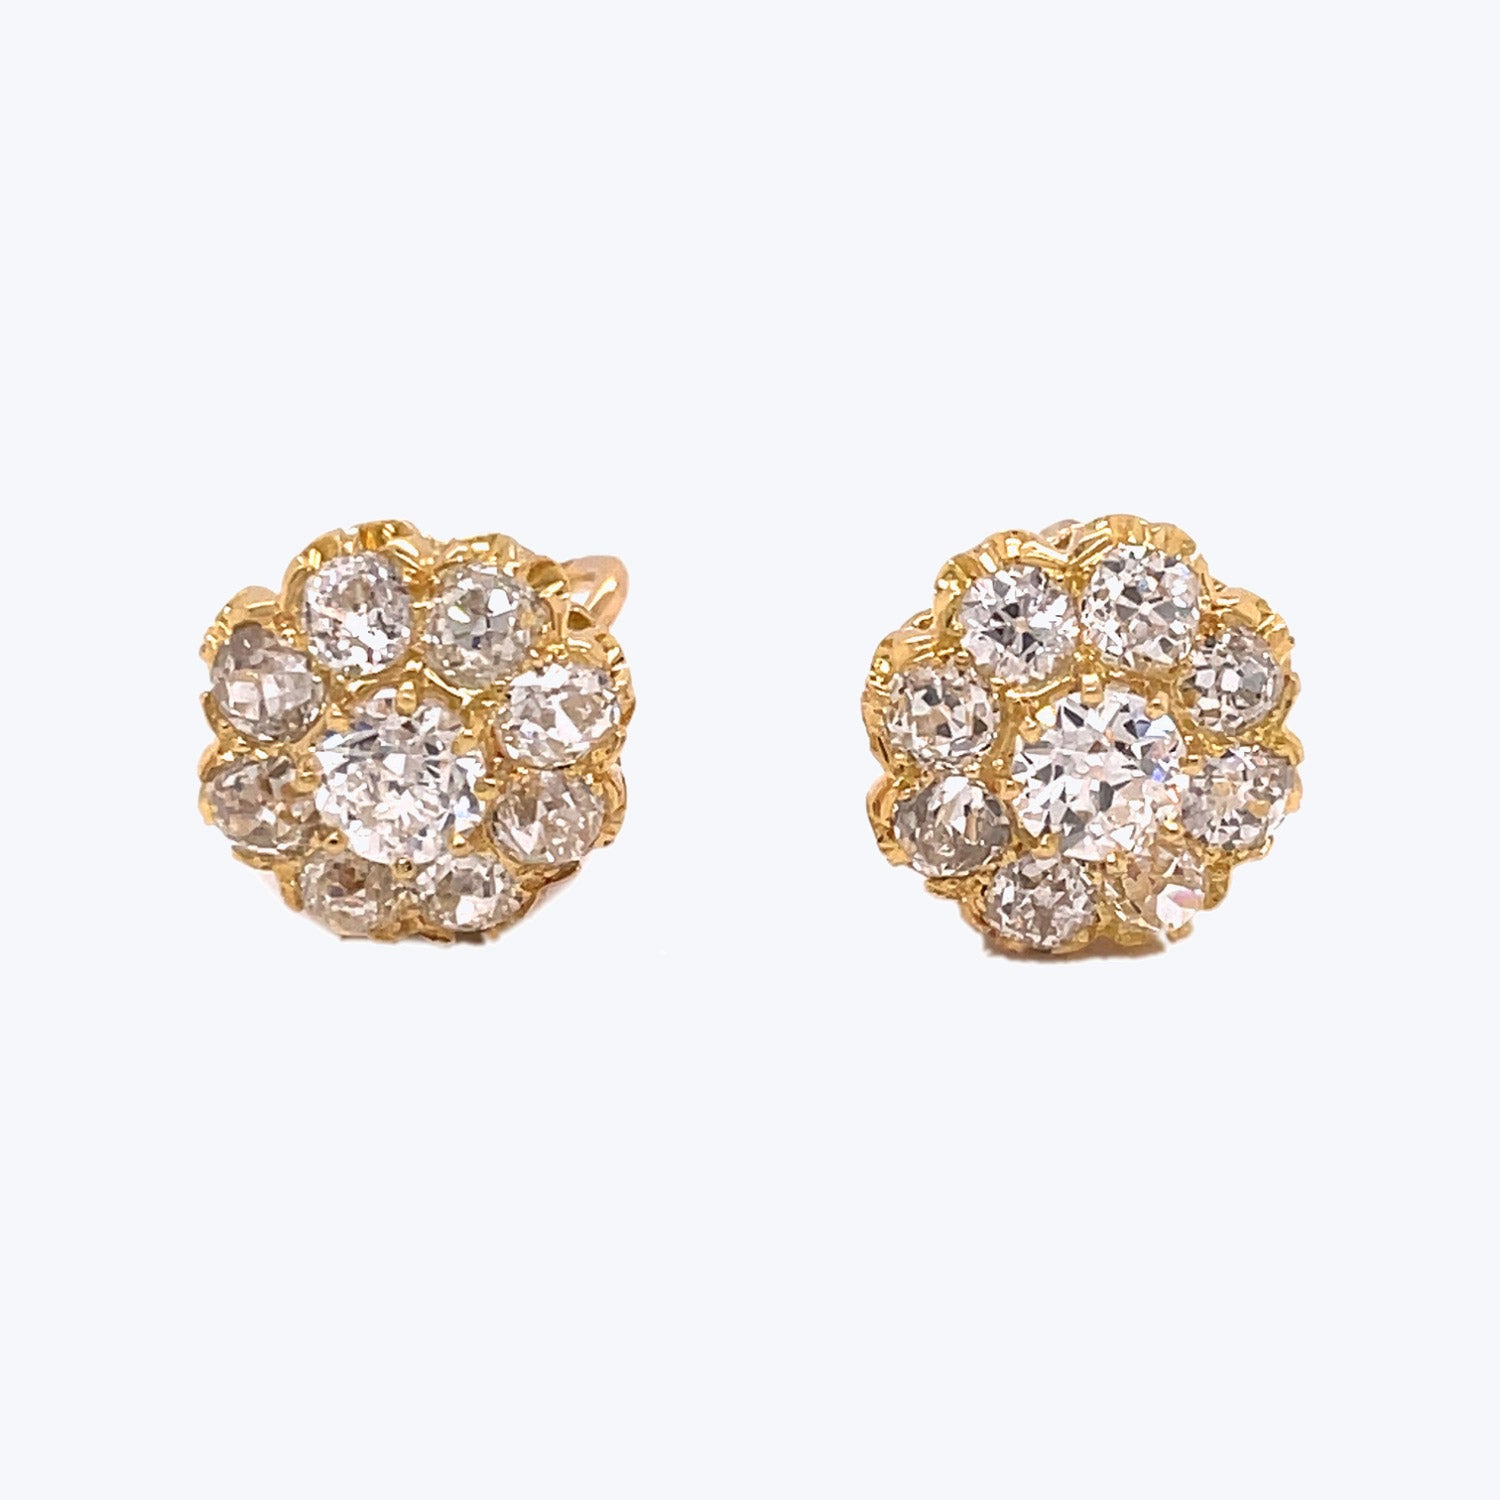 Victorian French Diamond Cluster Earrings